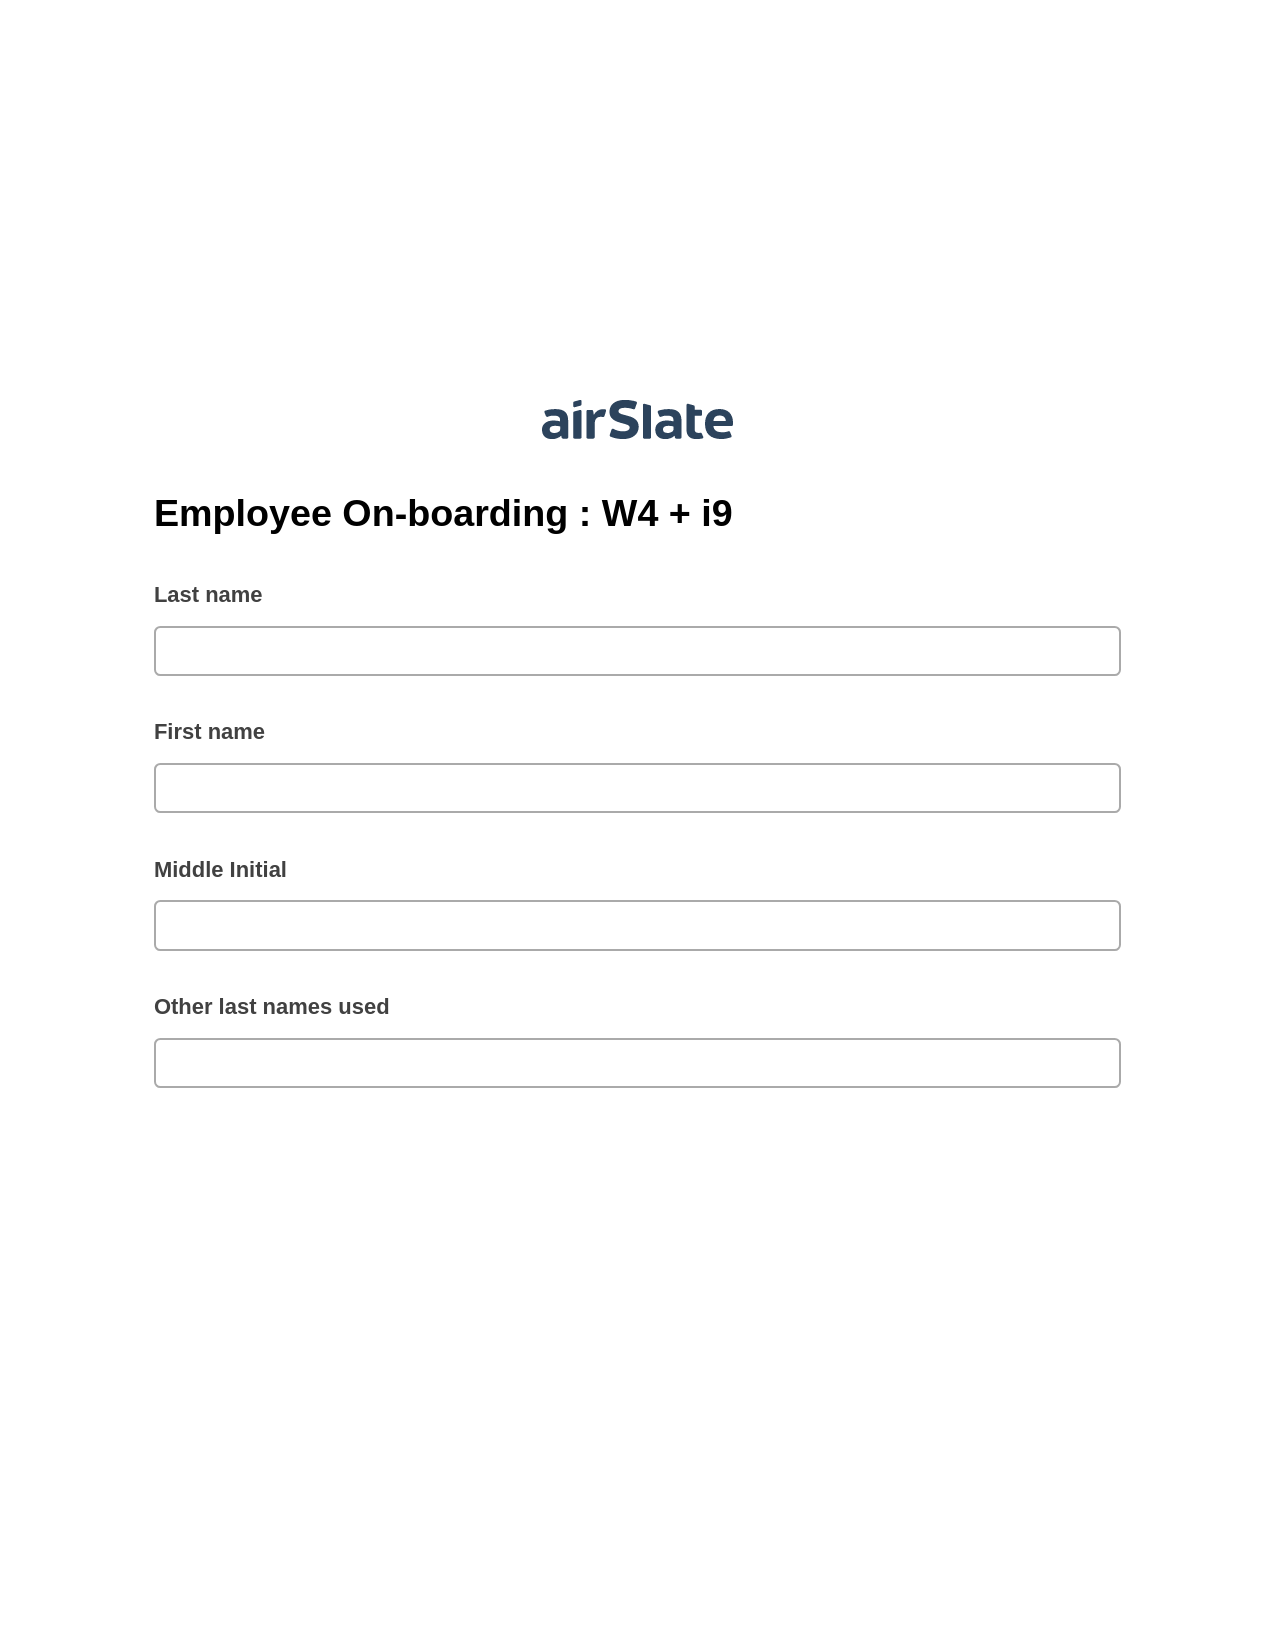 Employee On-boarding : W4 + i9 Pre-fill Document Bot, Unassign Role Bot, Webhook Postfinish Bot